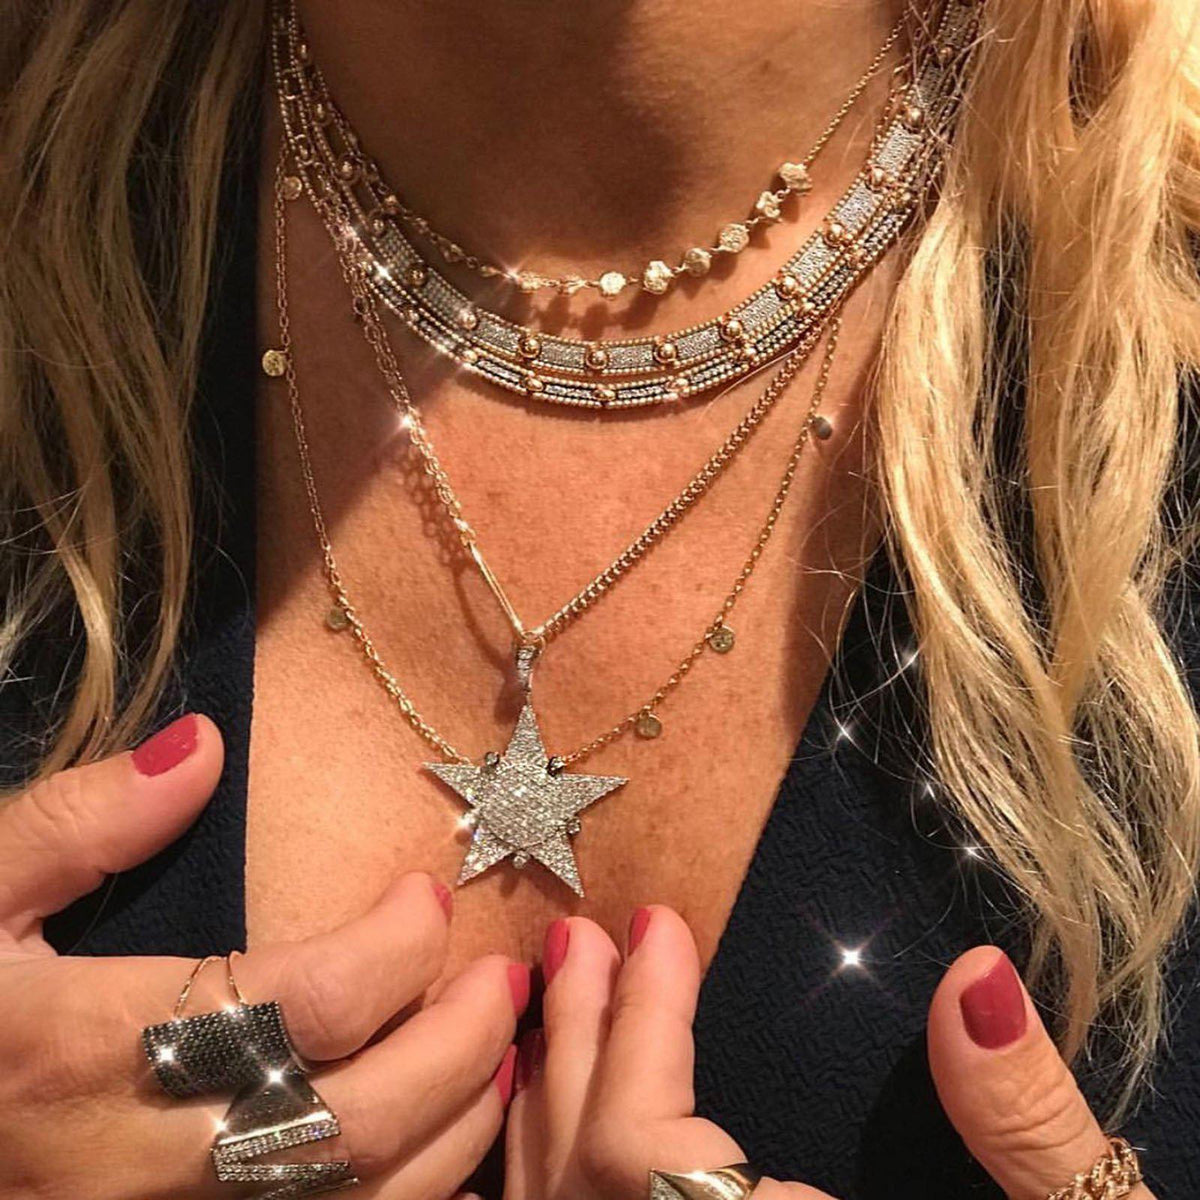 Maxi Eclectic Star Necklace